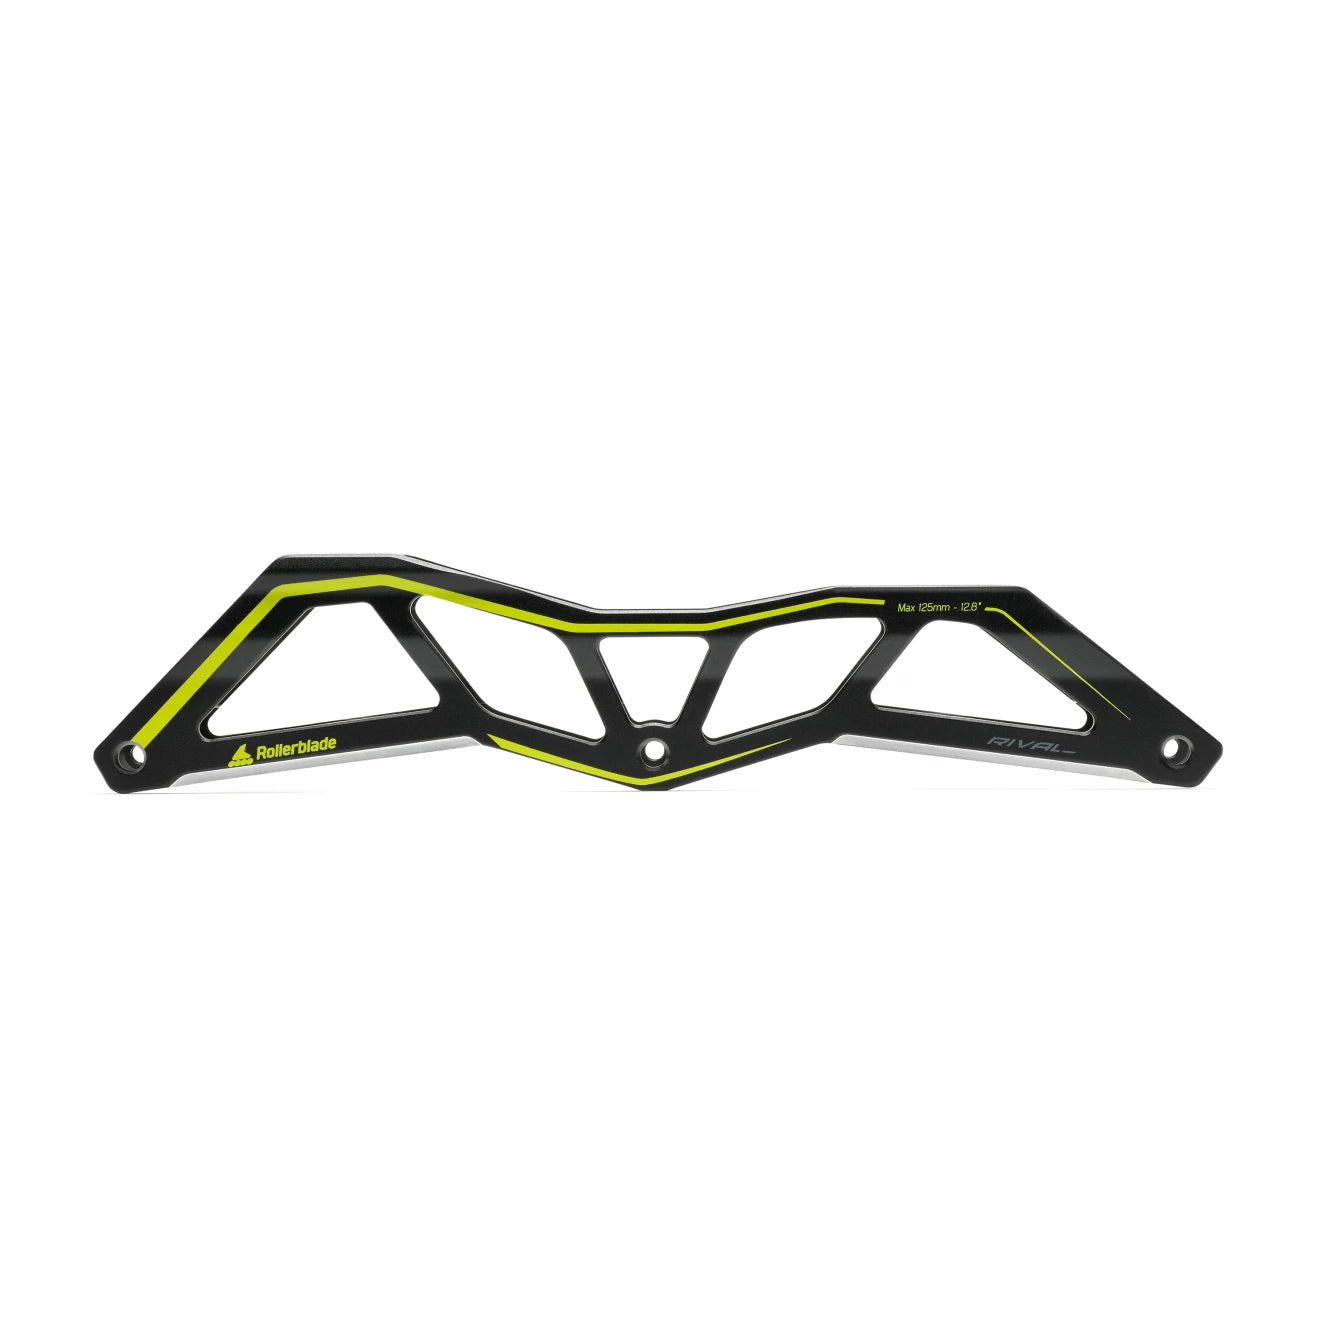 Rollerblade Rival 12.8" Frame - 3x125